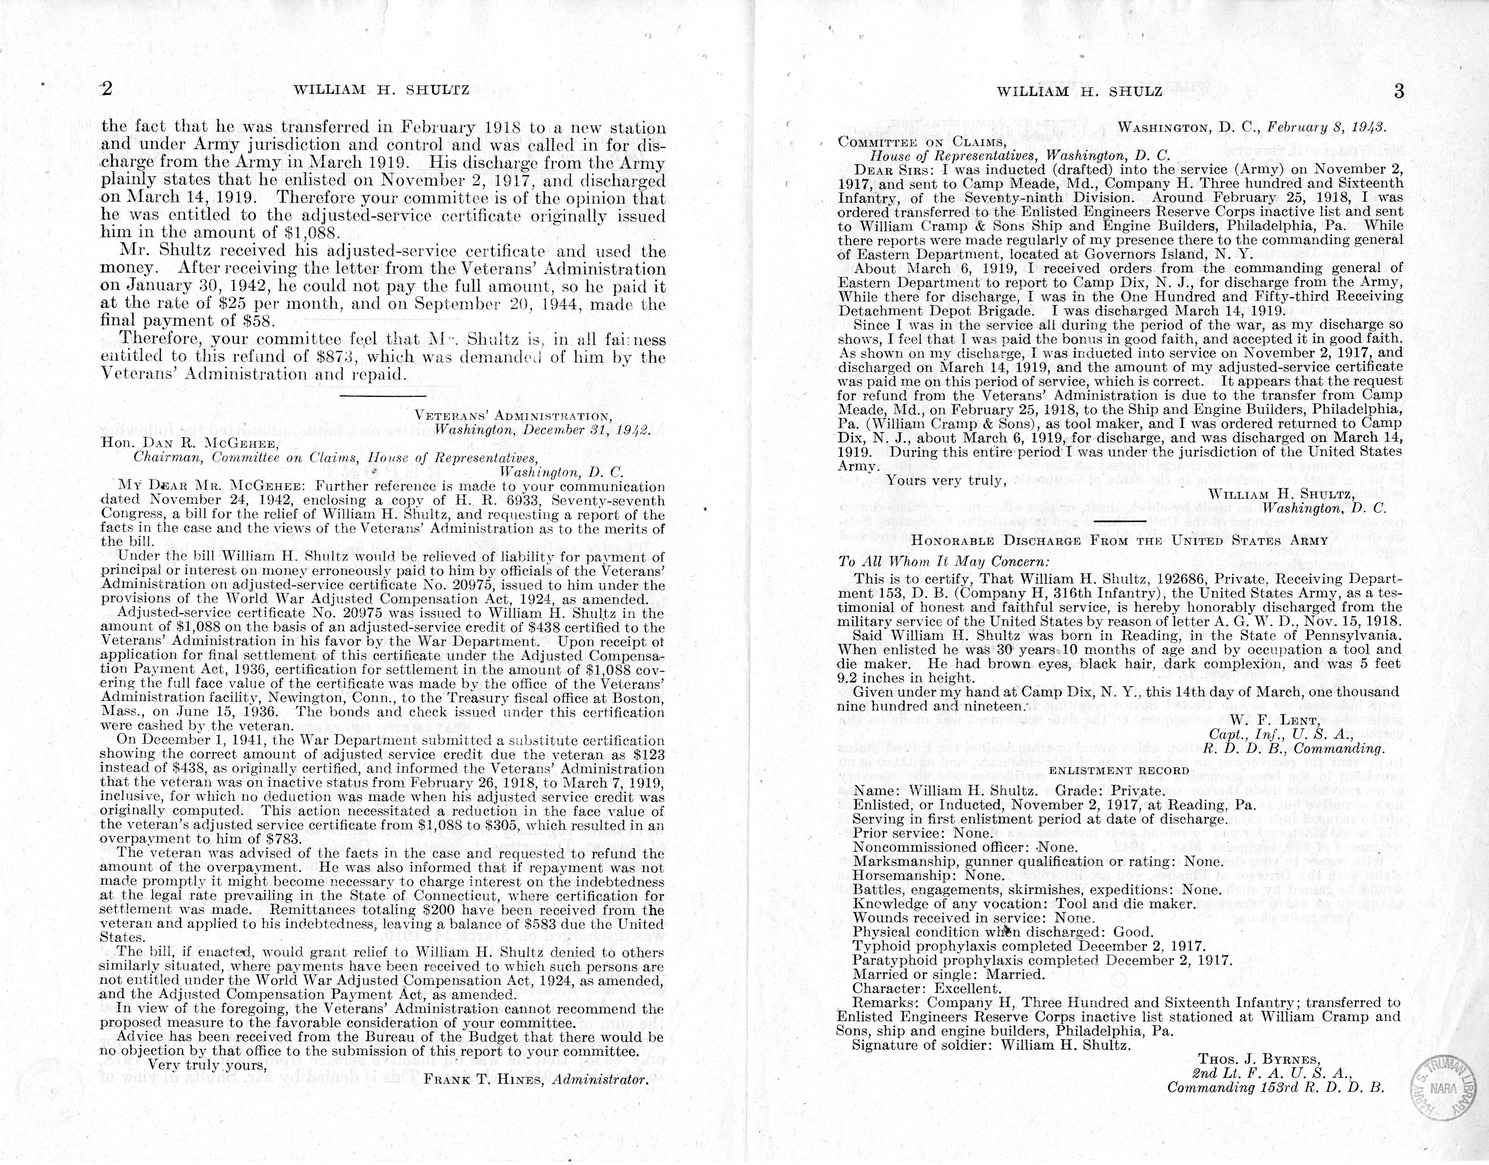 Memorandum from Harold D. Smith to M. C. Latta, H.R. 912, For the Relief of William H. Shultz, with Attachments